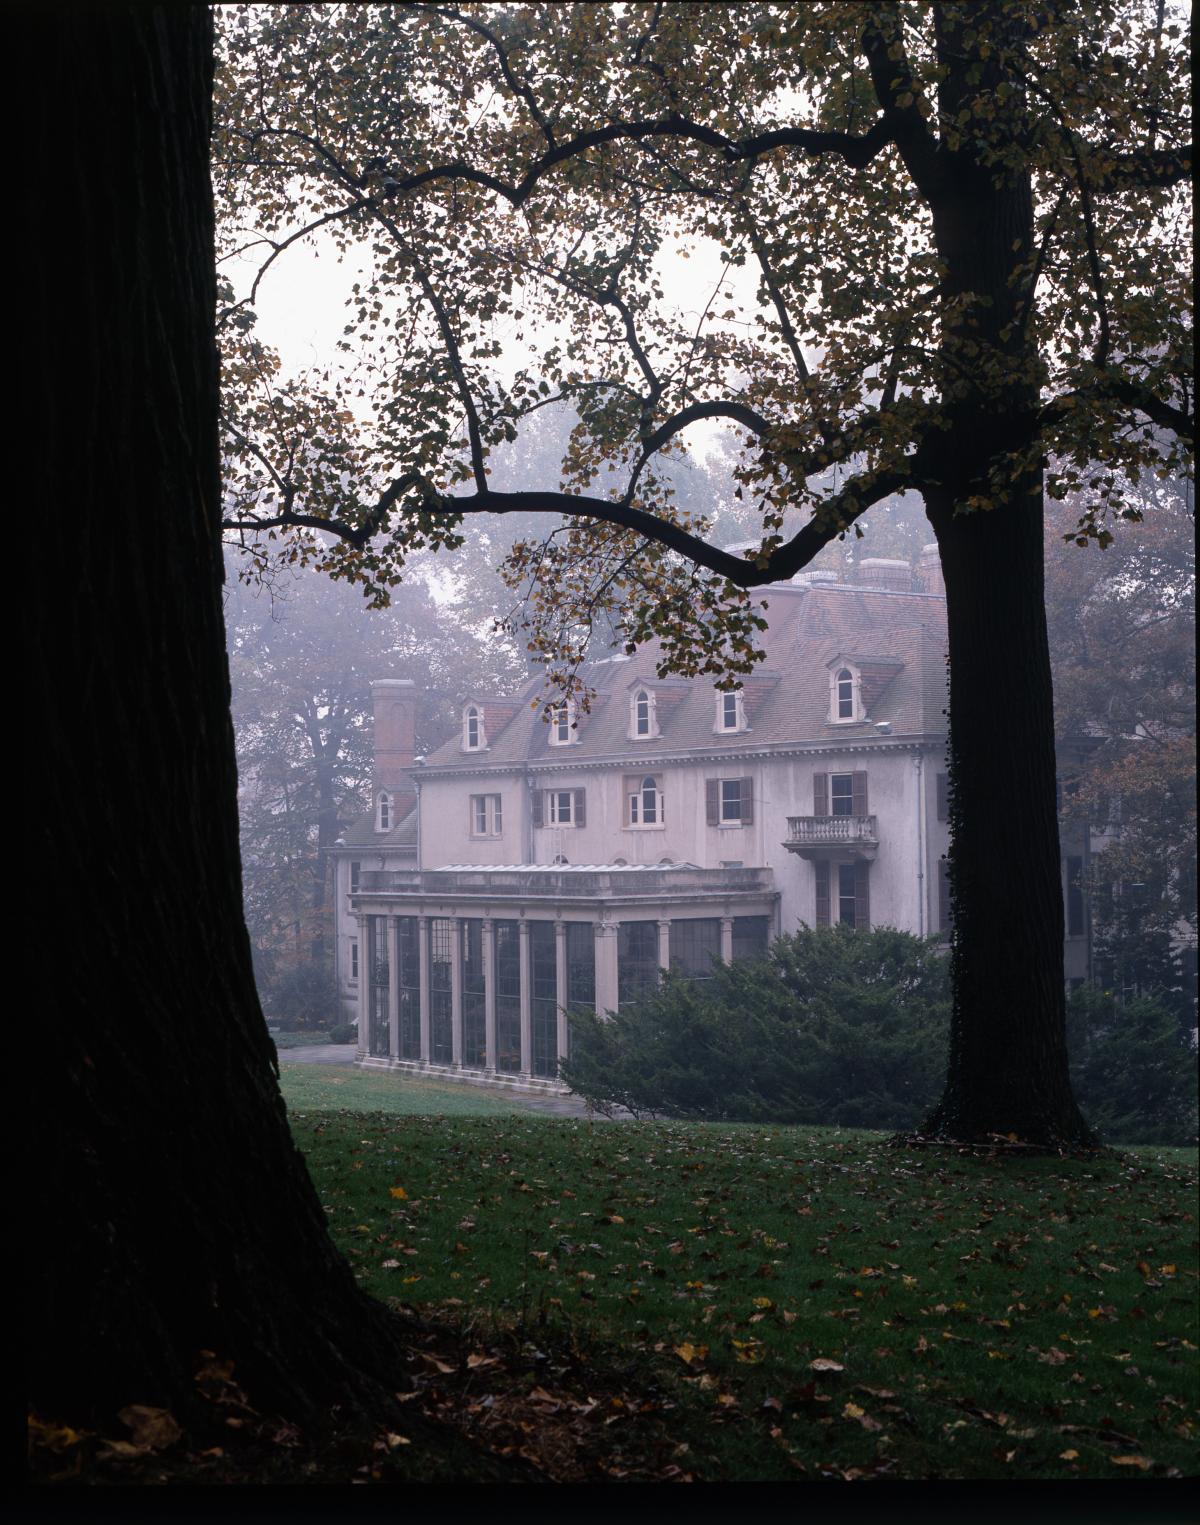 Photograph of a large house, shrouded in slight mist